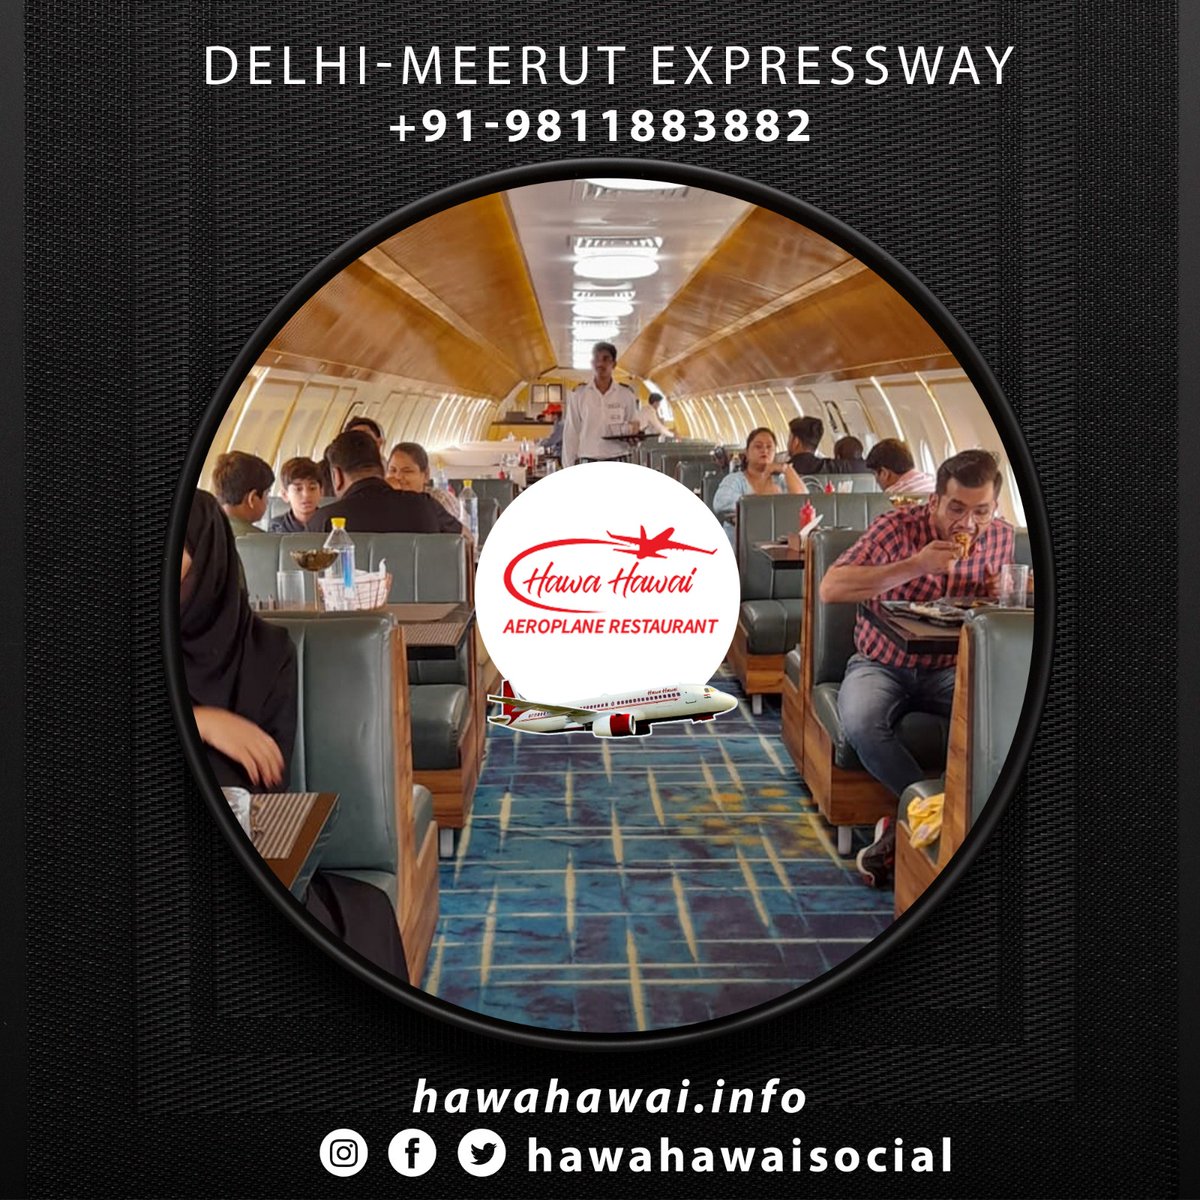 📷 Step into a world where dining isn't just about food; it's a journey through stories, flavors, and cherished moments. #flavorfulskyline
#hawahawai #aeroplanerestaurant #delhimerrutexpressway #aeroplane #dinning #foodphotography #delicious #aeroplanedining #vegetarianrestaurant